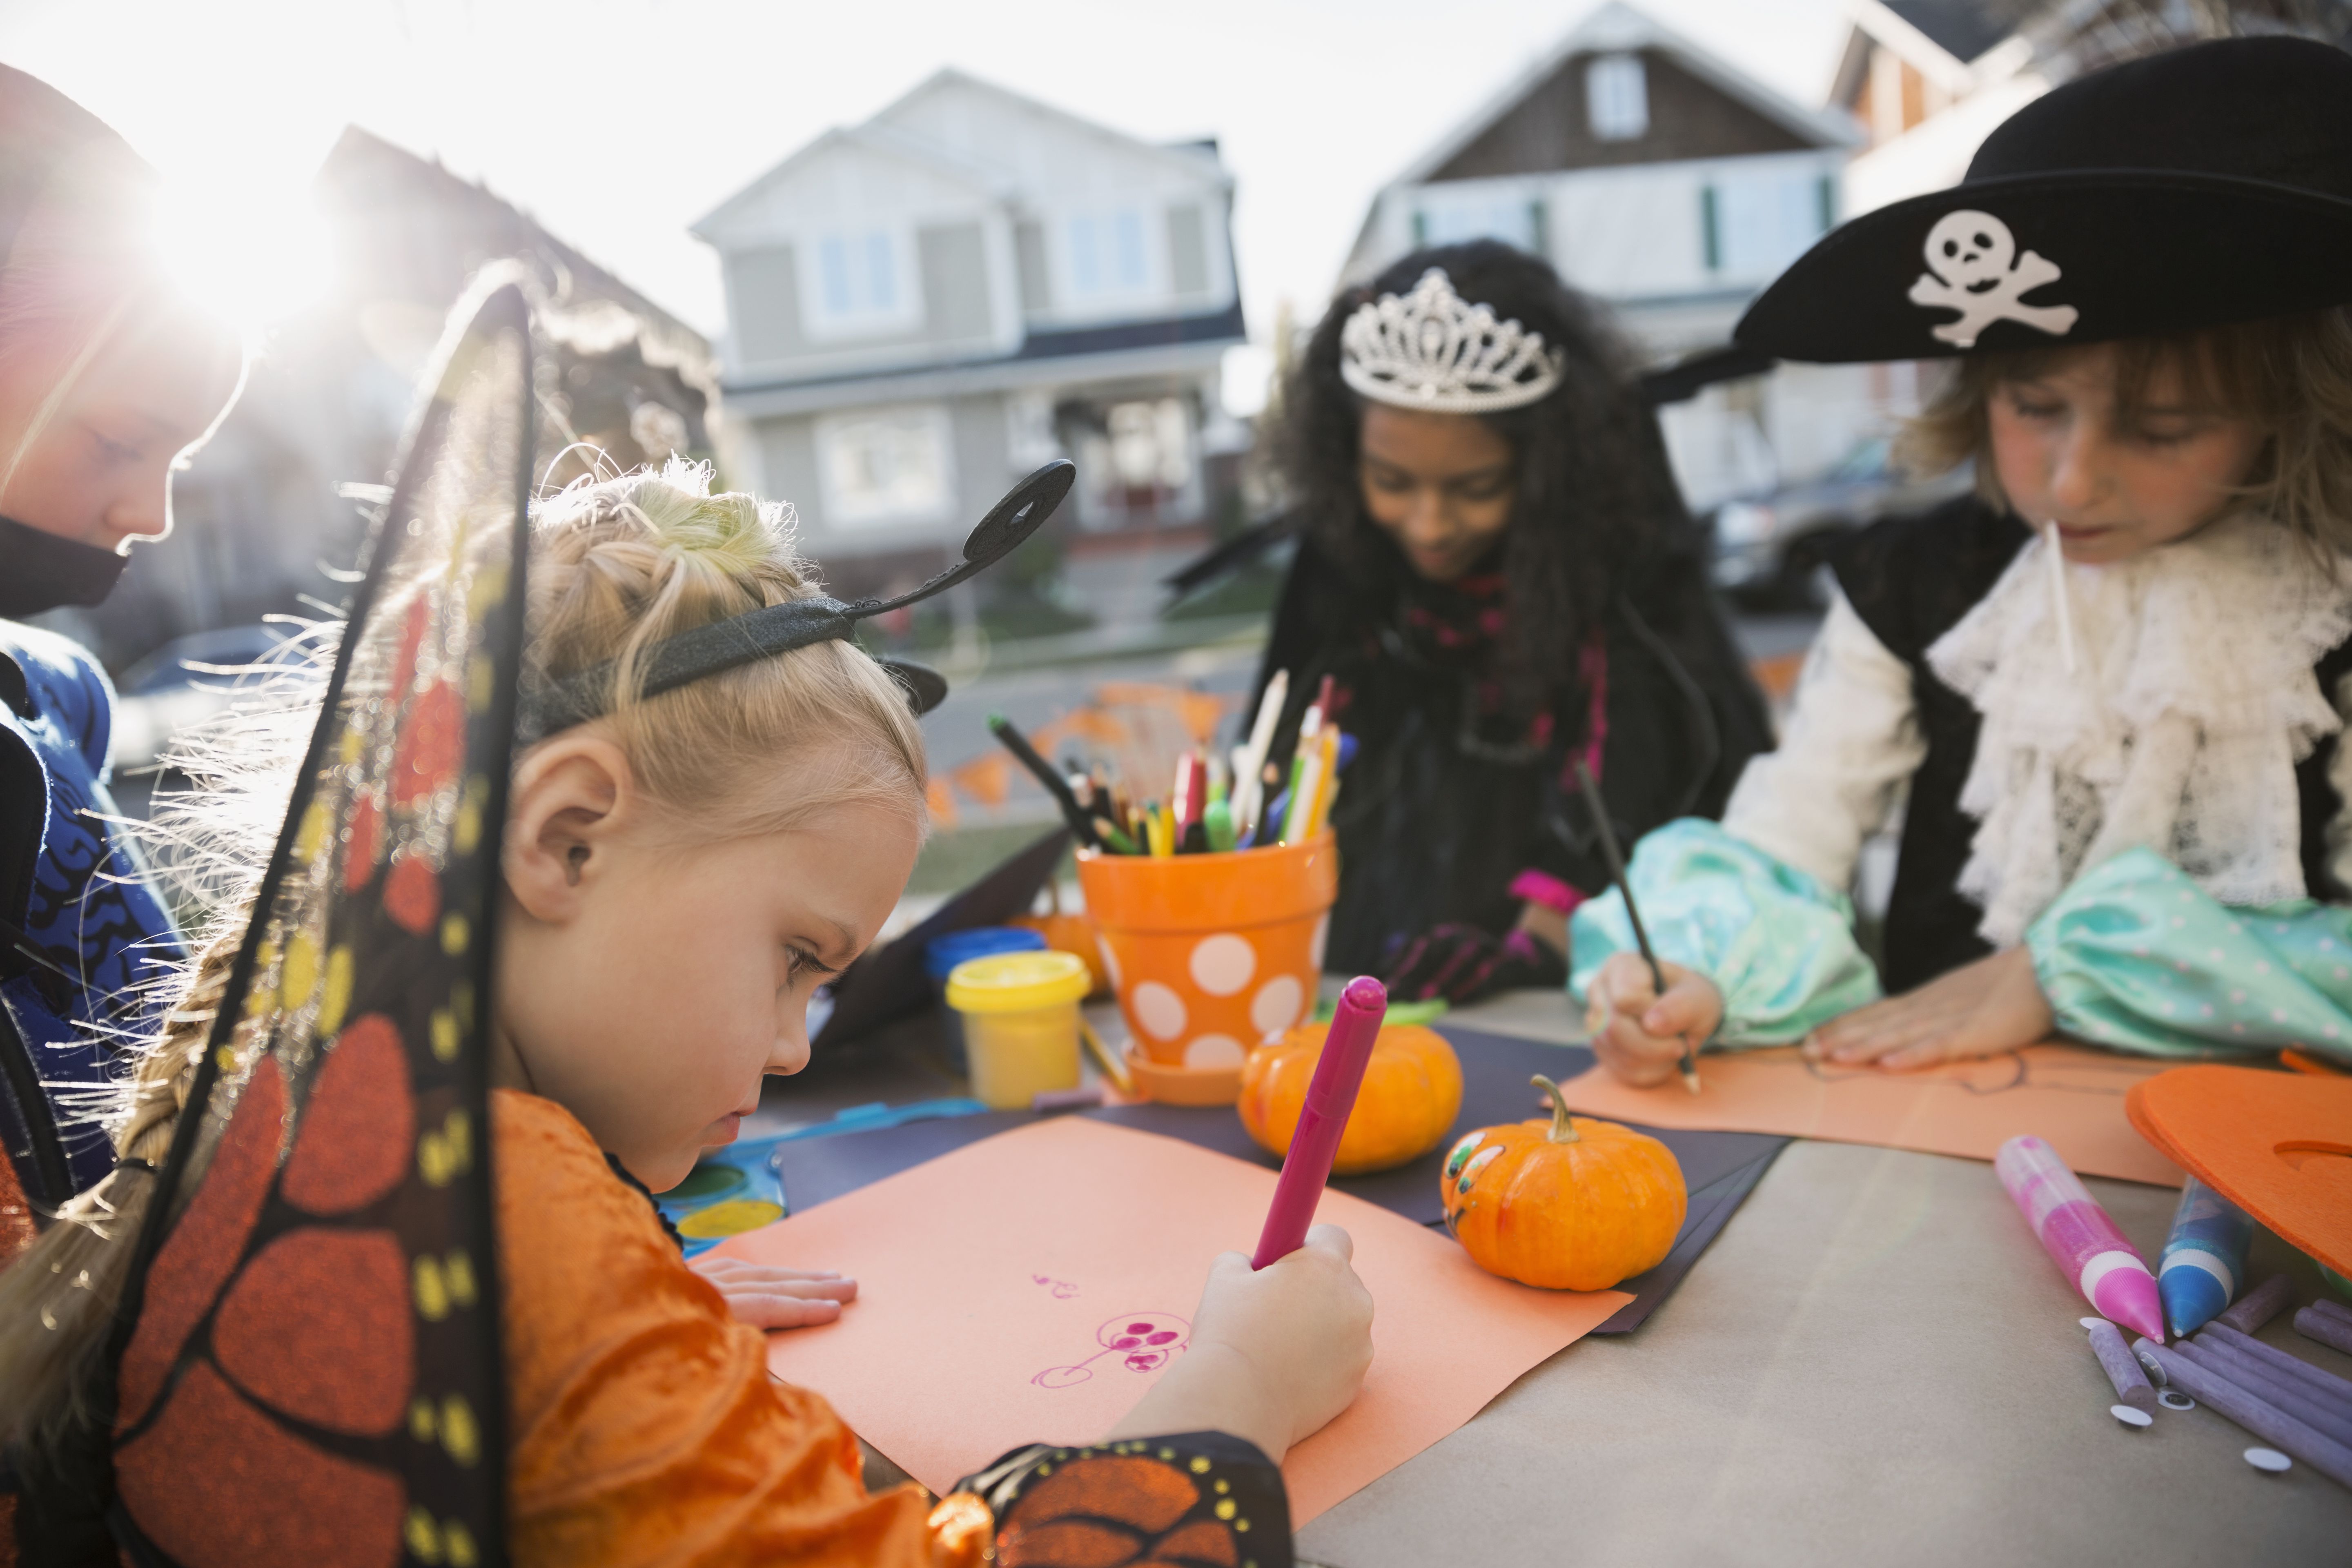 9711-kids-in-halloween-costumes-doing-crafts-front-yard-598522535-5968e7423df78c57f49-17102662511481.jpg